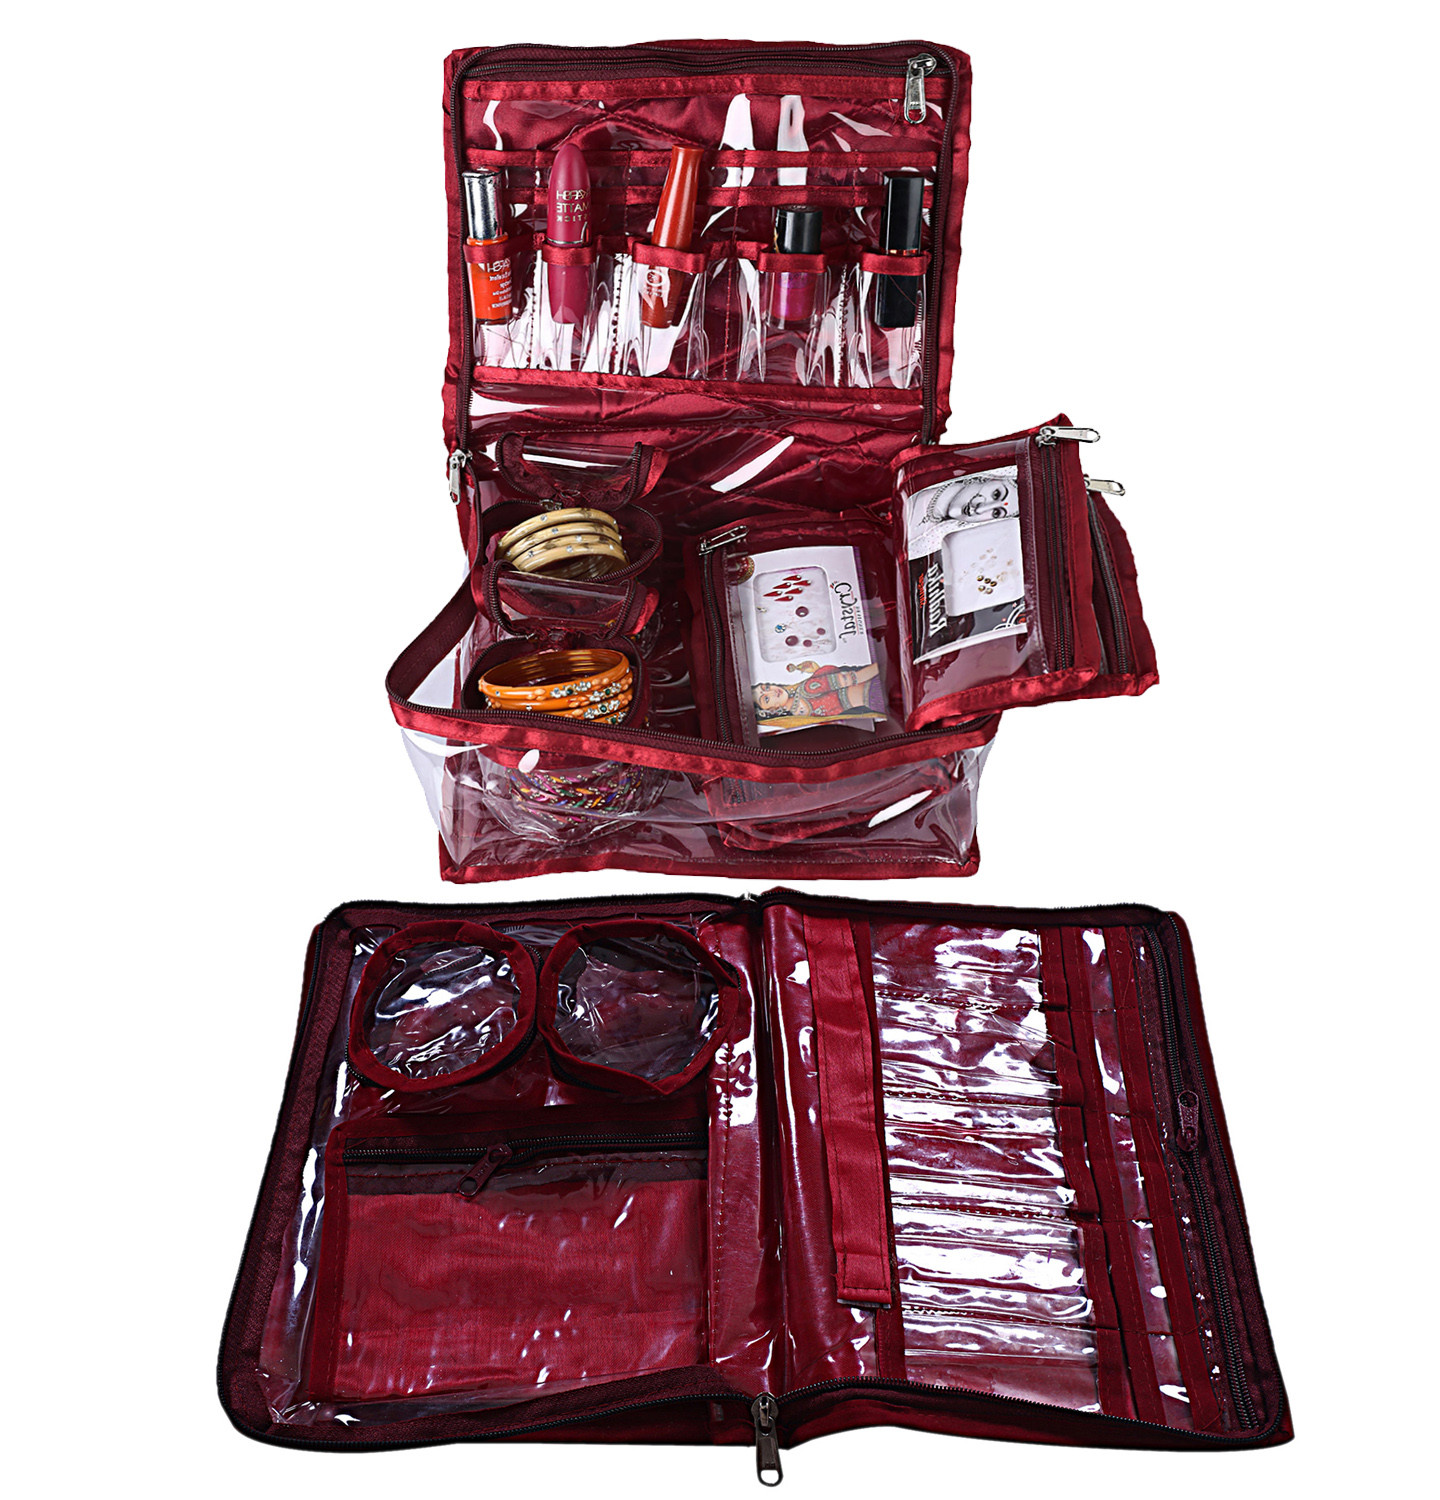 Kuber Industries Carry Print PVC Laminated Portable Jewellery Organizer With 4 Pouches & 2 Bangle Pouches For Home and Travel (Maroon)